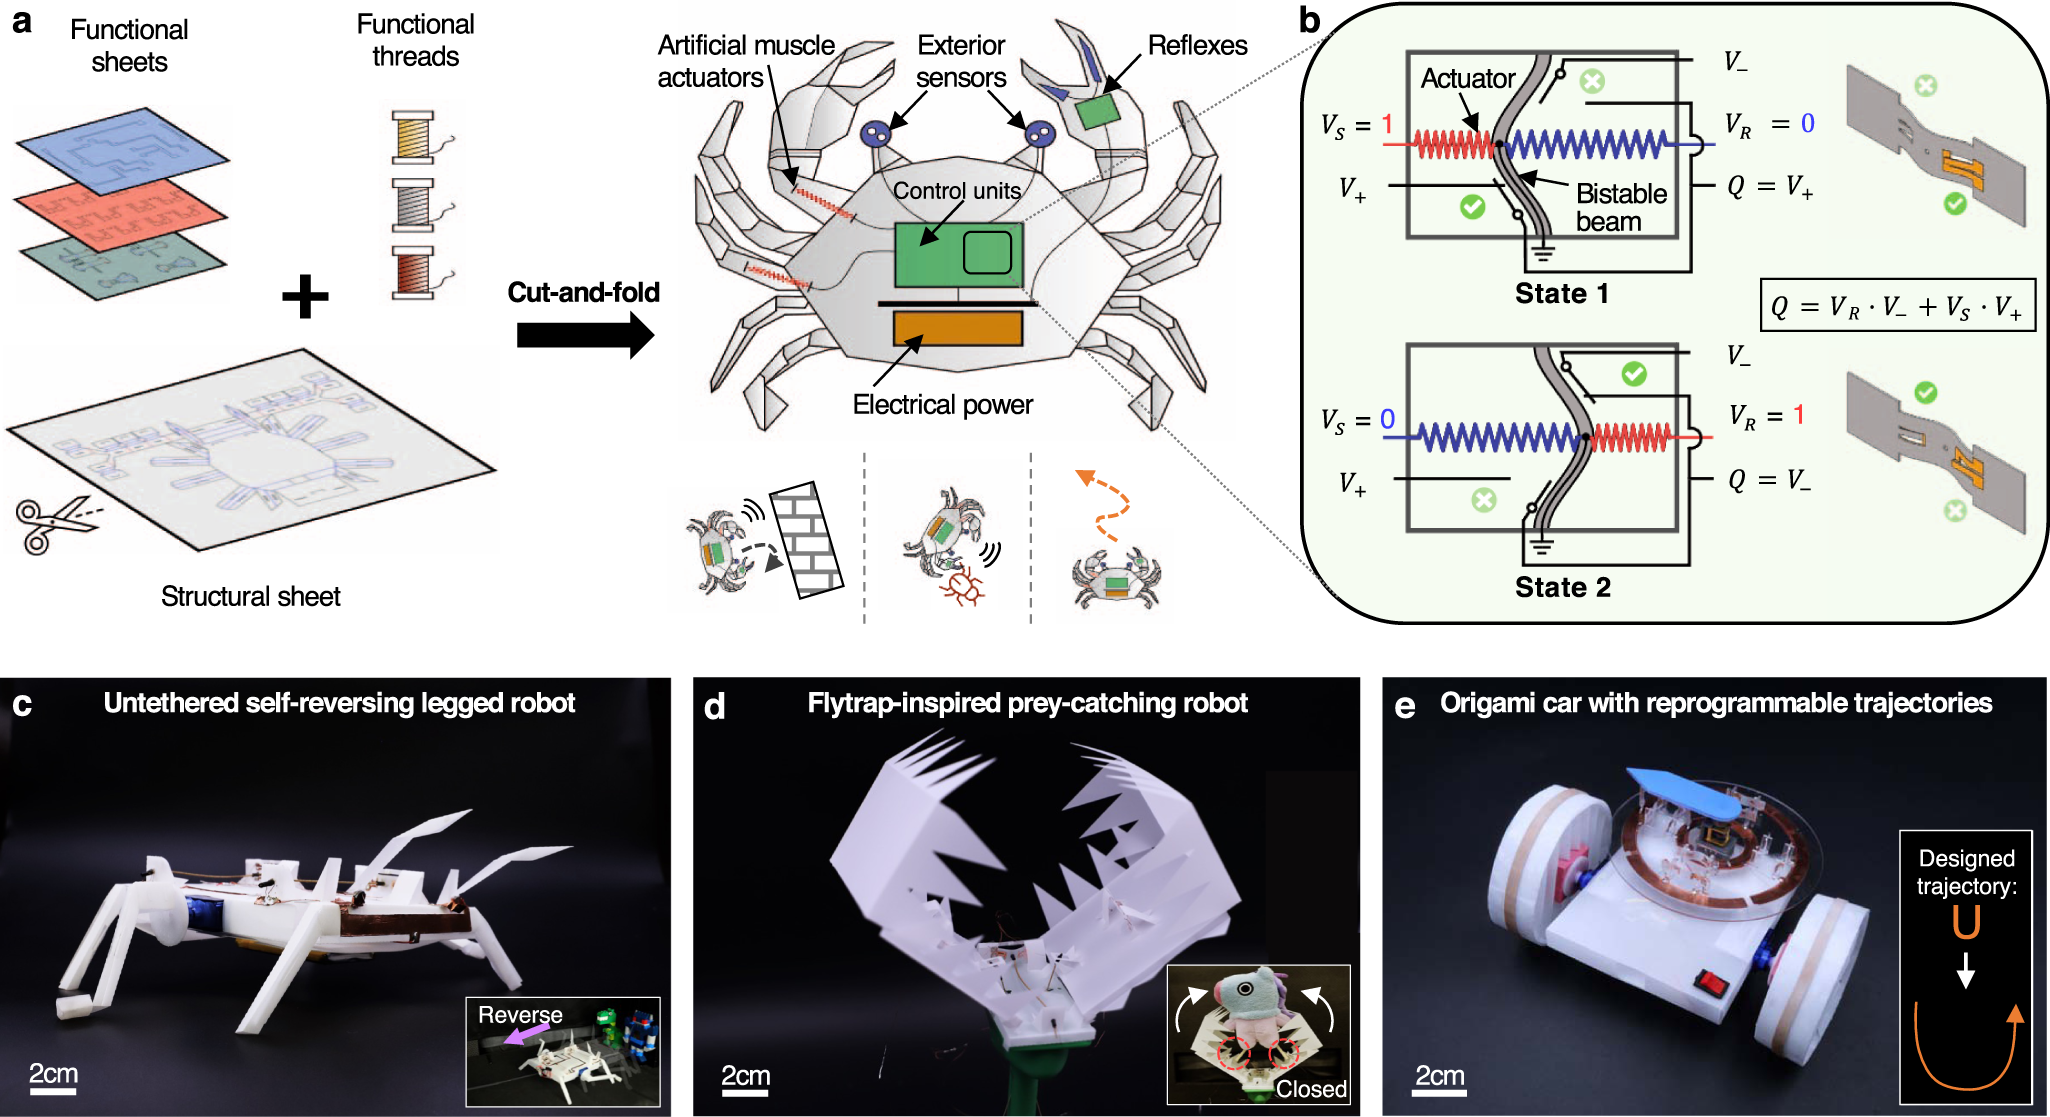 Origami-based integration robots that sense, decide, and respond | Nature Communications